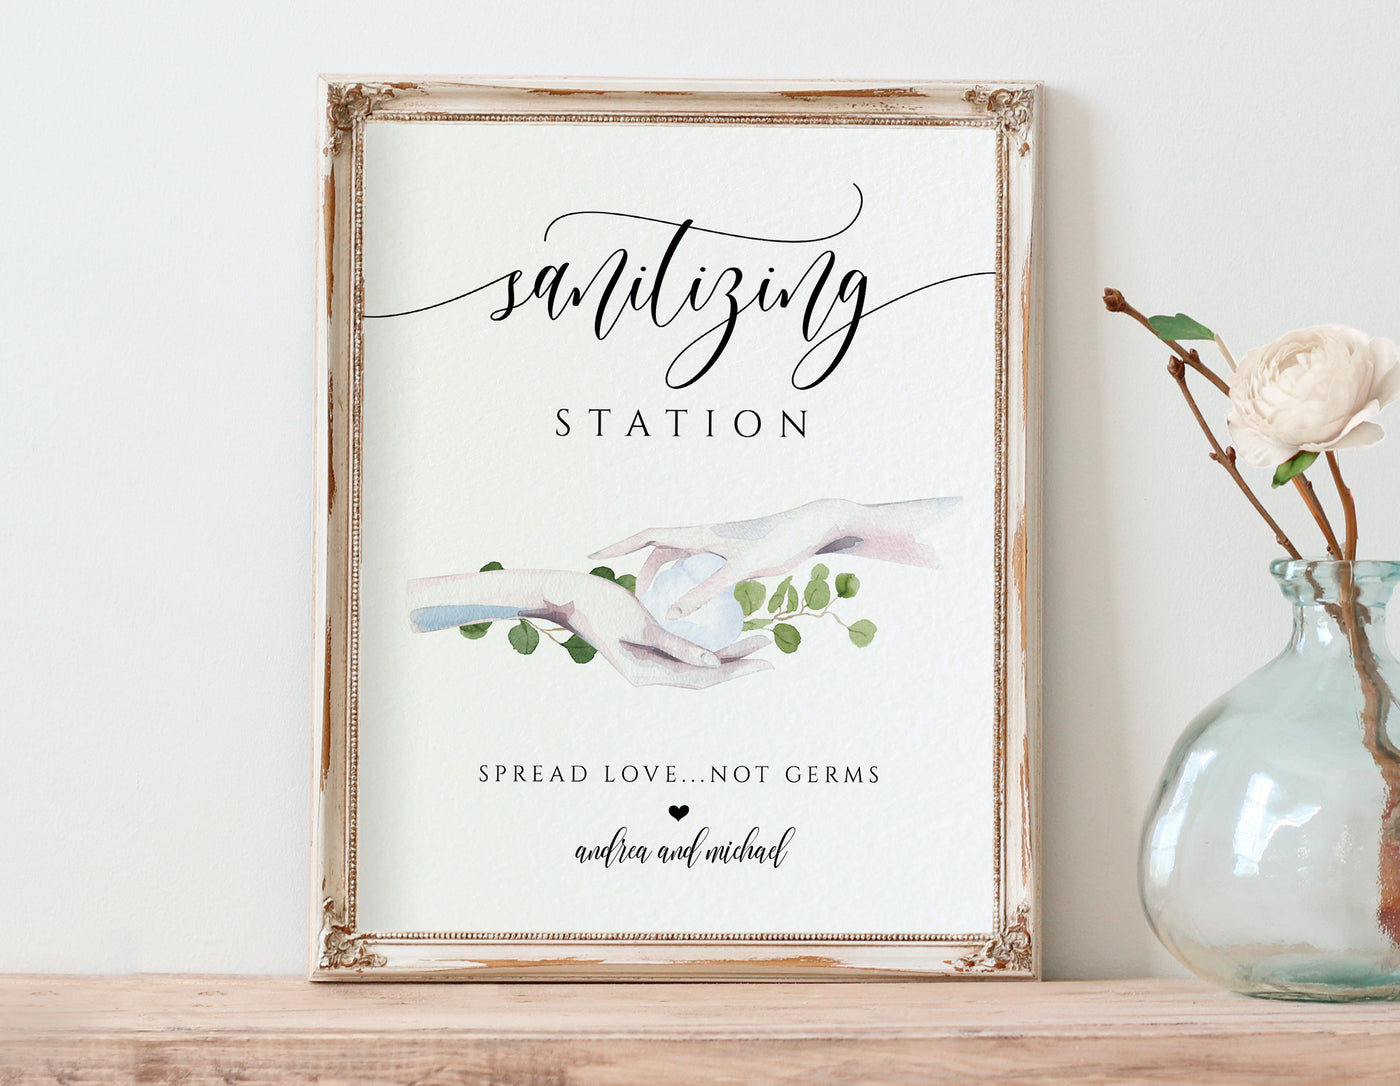 Sanitizing Station Signs for Weddings